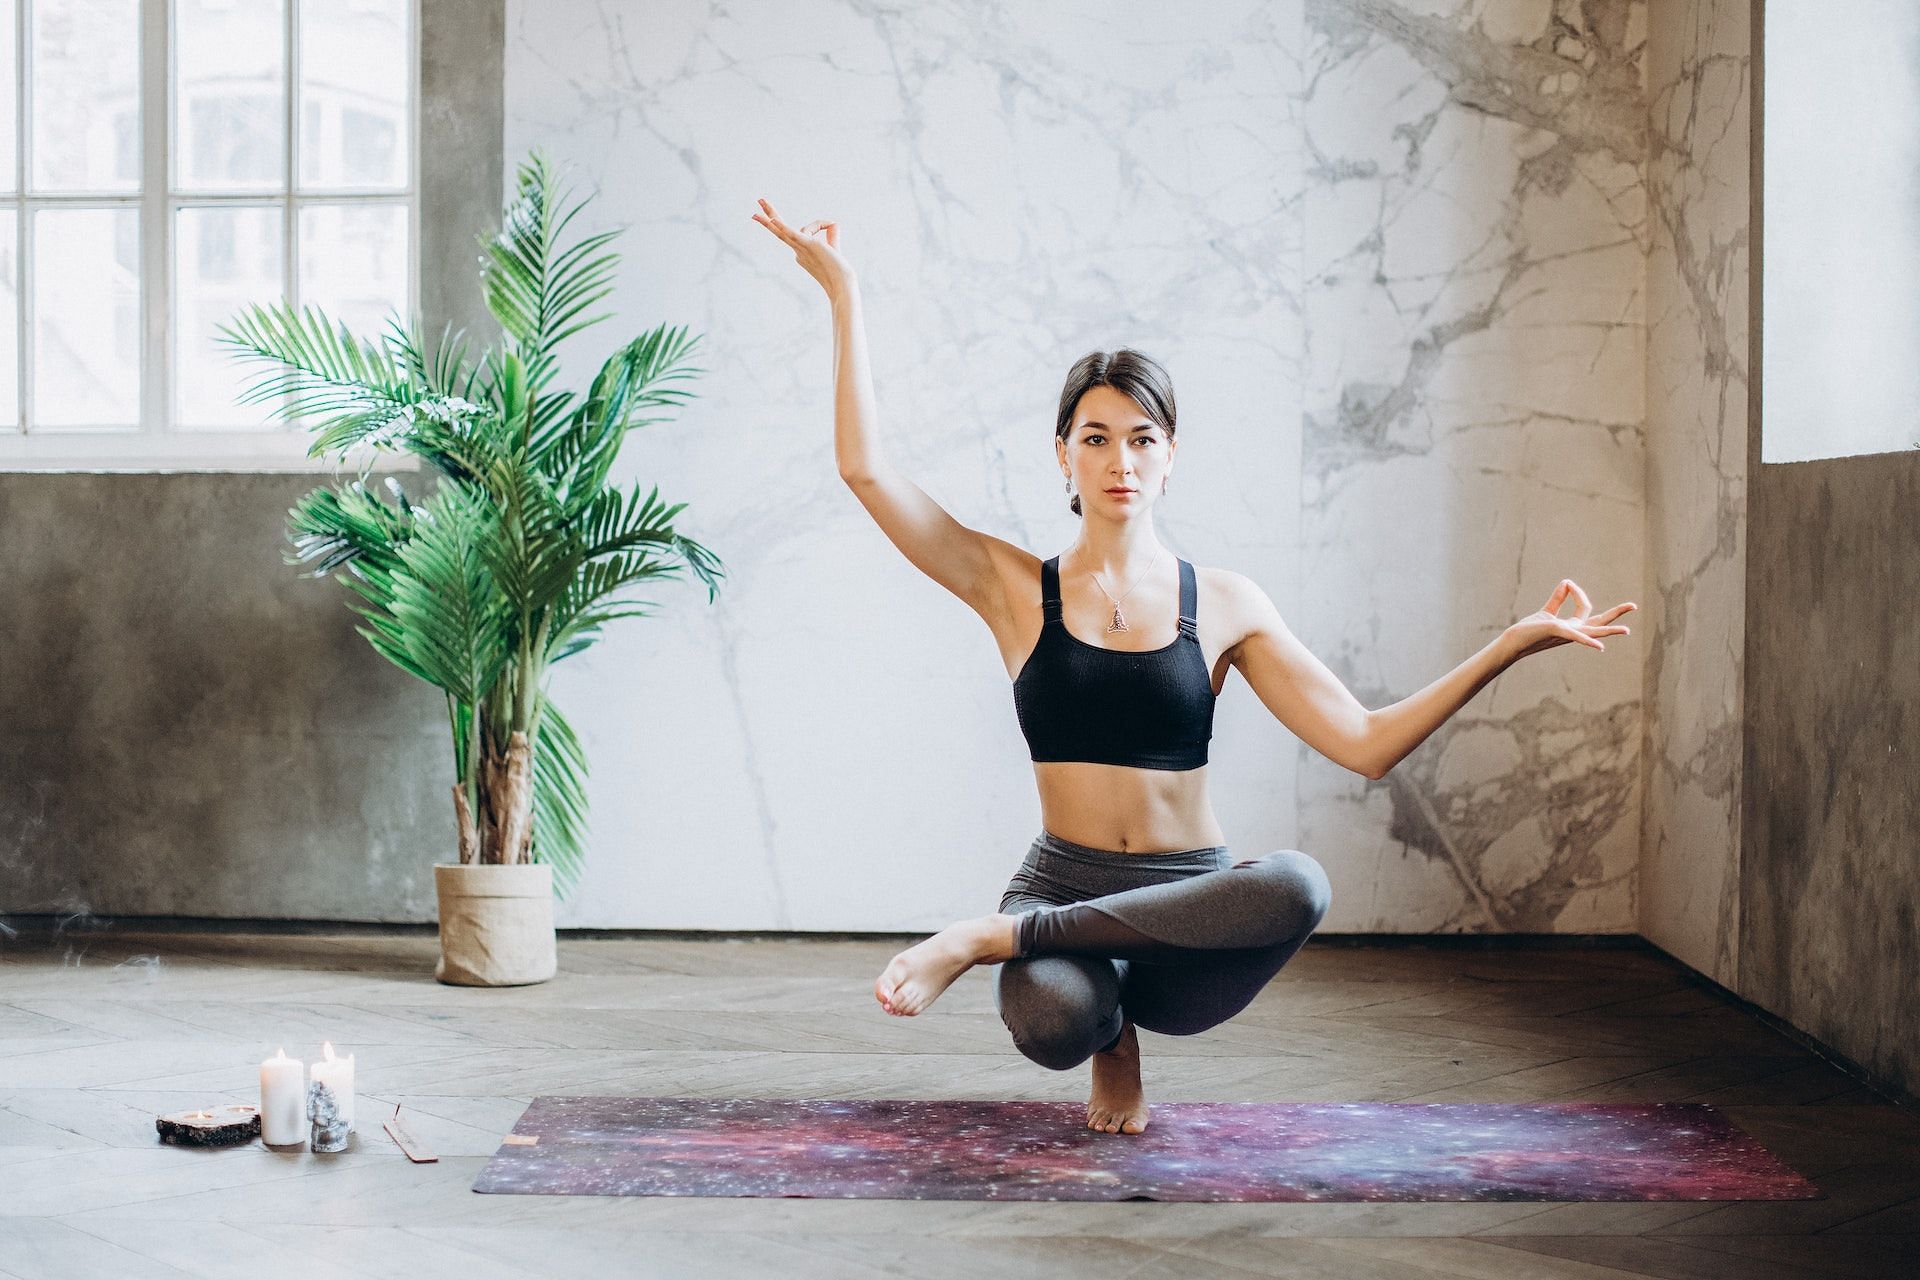 8 Yoga Poses Every Woman Should Practice - The Doctor Weighs In